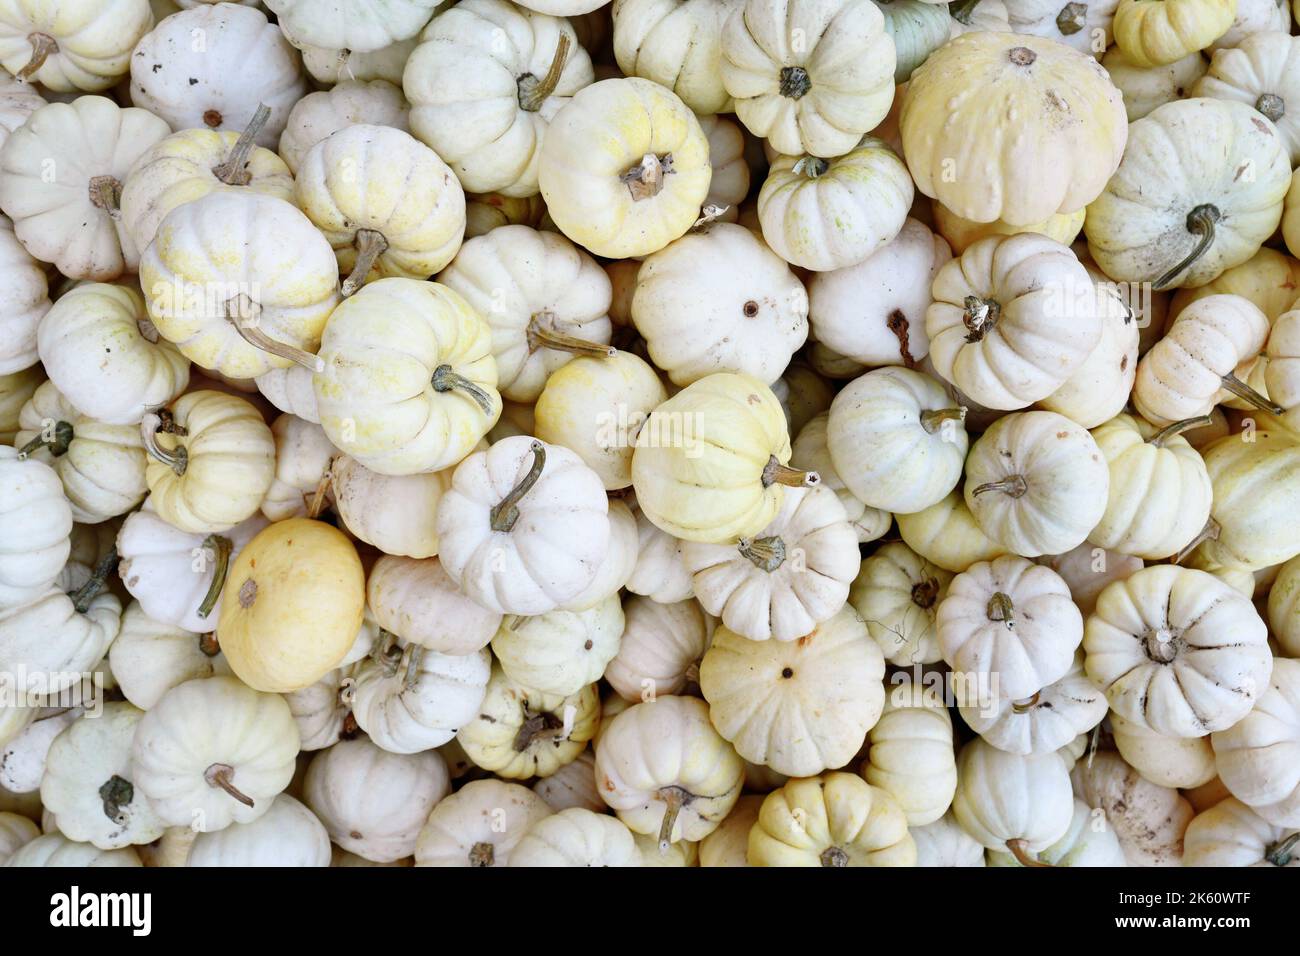 Top view of many small white Baby Boo pumpkins Stock Photo